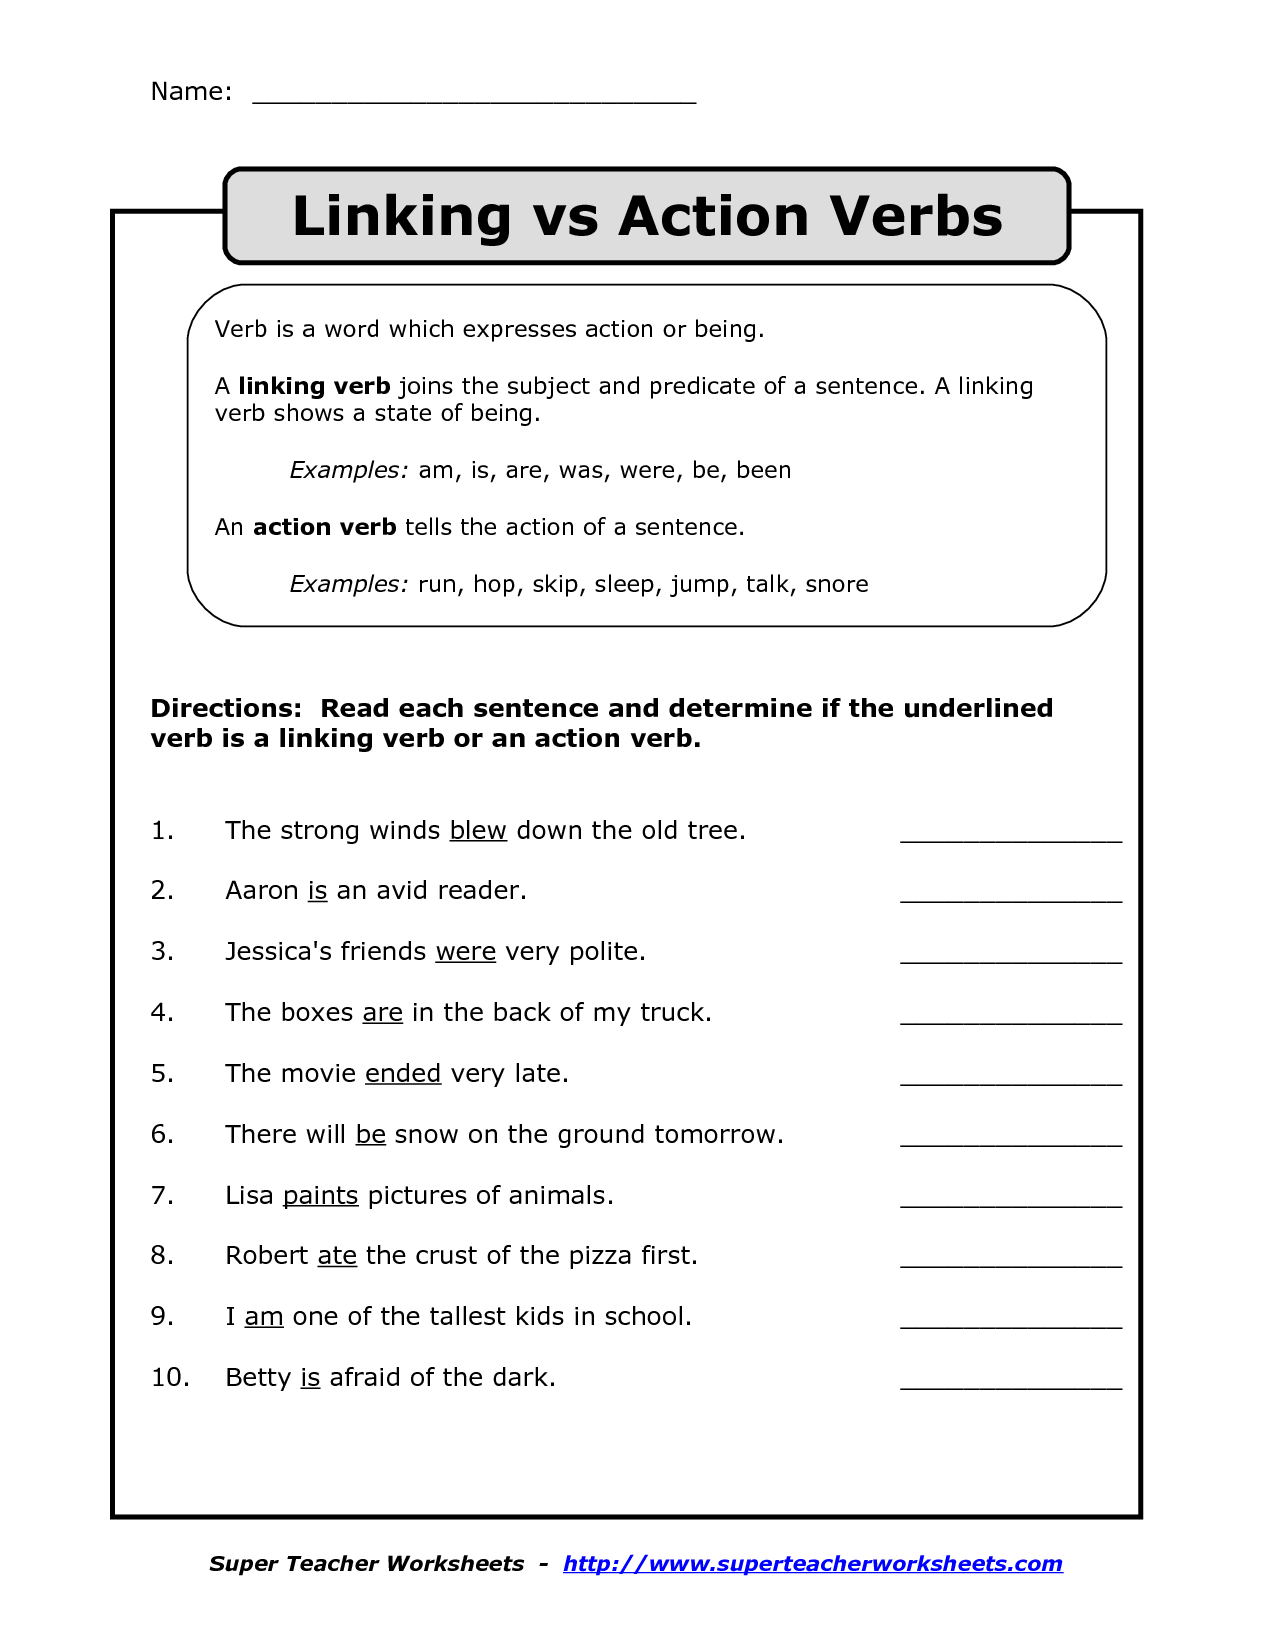 marcella-polintan-what-are-linking-verbs-short-answer